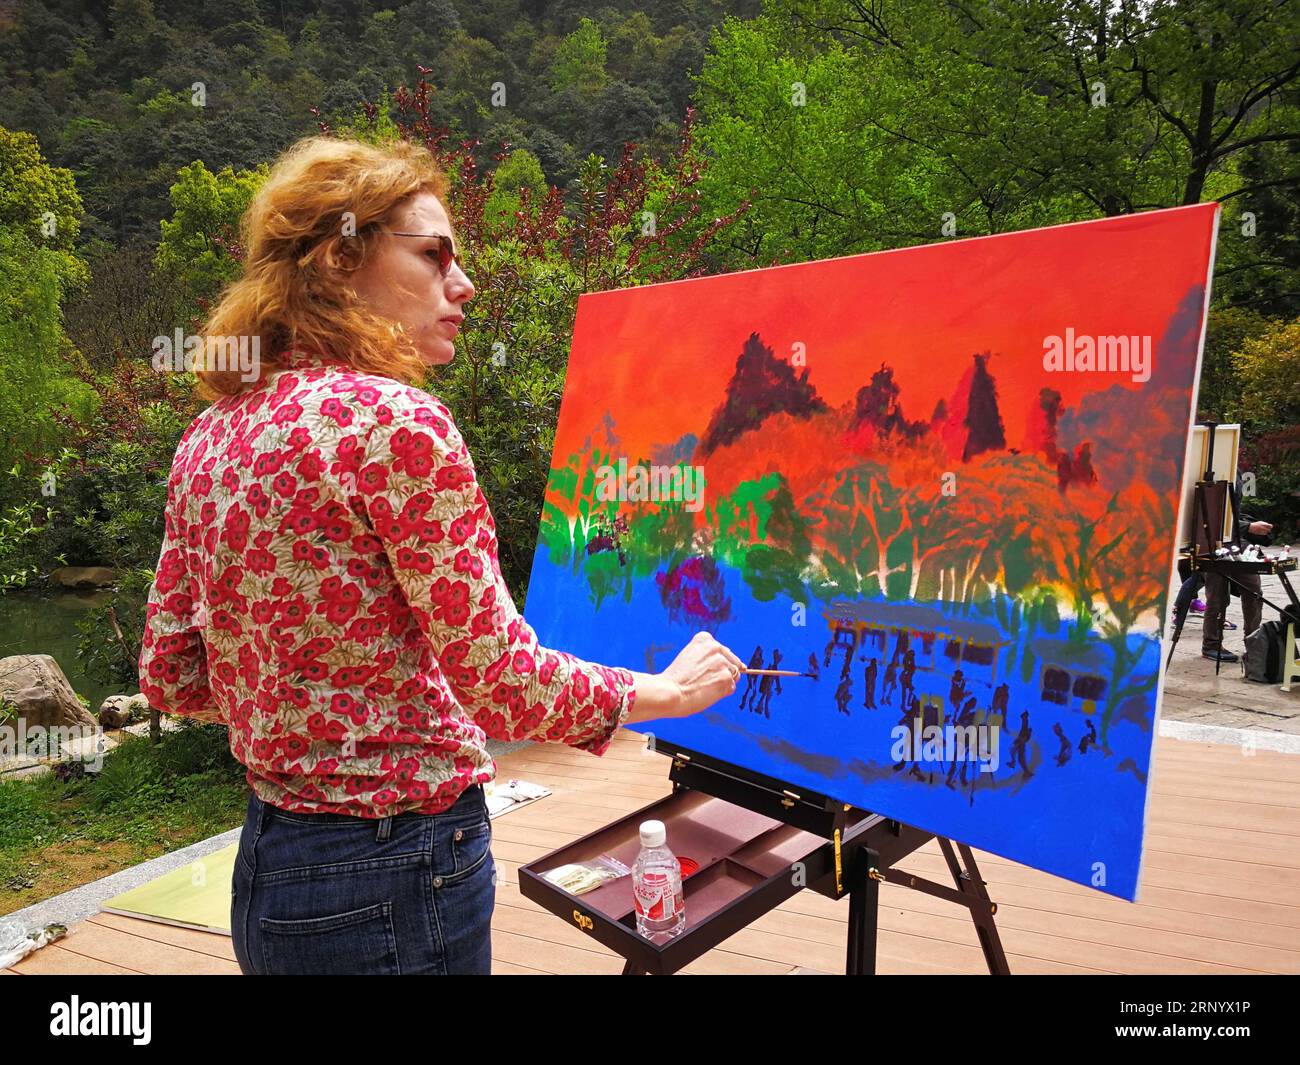 (180407) -- ZHANGJIAJIE, April 7, 2018 -- Julienna Polidoro from Italy paints at Zhangjiajie UNESCO Global Geopark at Wulingyuan District of Zhangjiajie City, central China s Hunan Province, April 6, 2018. About 21 artists coming from Italy took part in a cultural event at the geopark which is known for its quartzose sandstone landform. This geopark is one of the geoparks in China that have already been chosen by UNESCO on its World Network of Geoparks. )(wsw) CHINA-HUNAN-ZHANGJIAJIE GEOPARK-ITALIAN ARTISTS (CN*) WangxJianjun PUBLICATIONxNOTxINxCHN Stock Photo